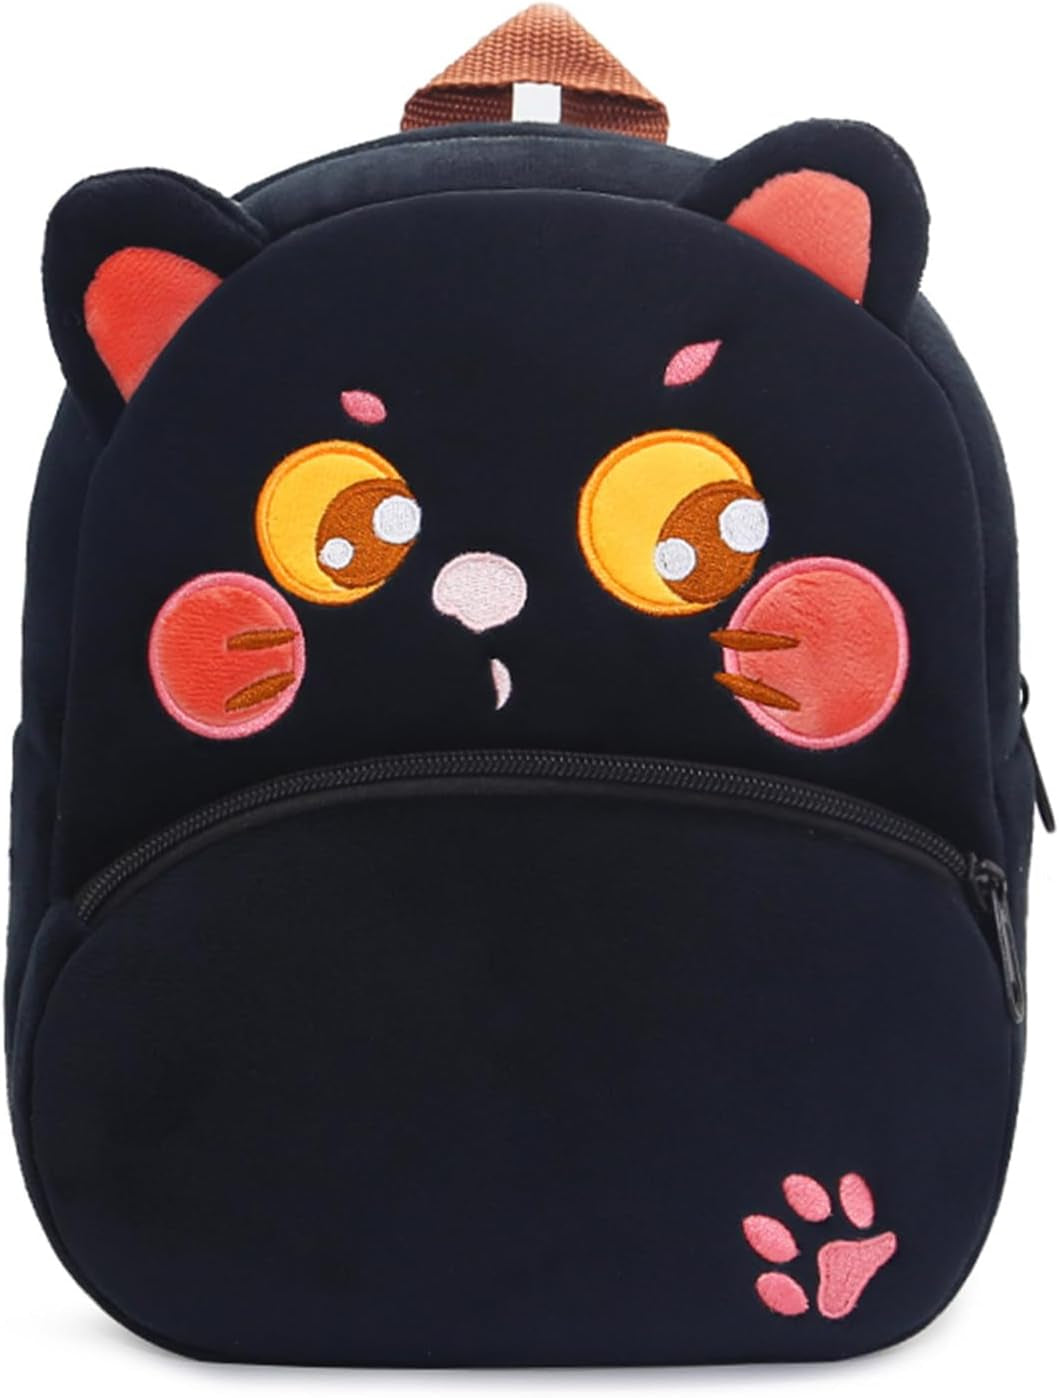 Toddler Backpack for Boys and Girls, Cute Soft Plush Animal Cartoon Mini Backpack Little for Kids 2-6 Years (Cat Black)